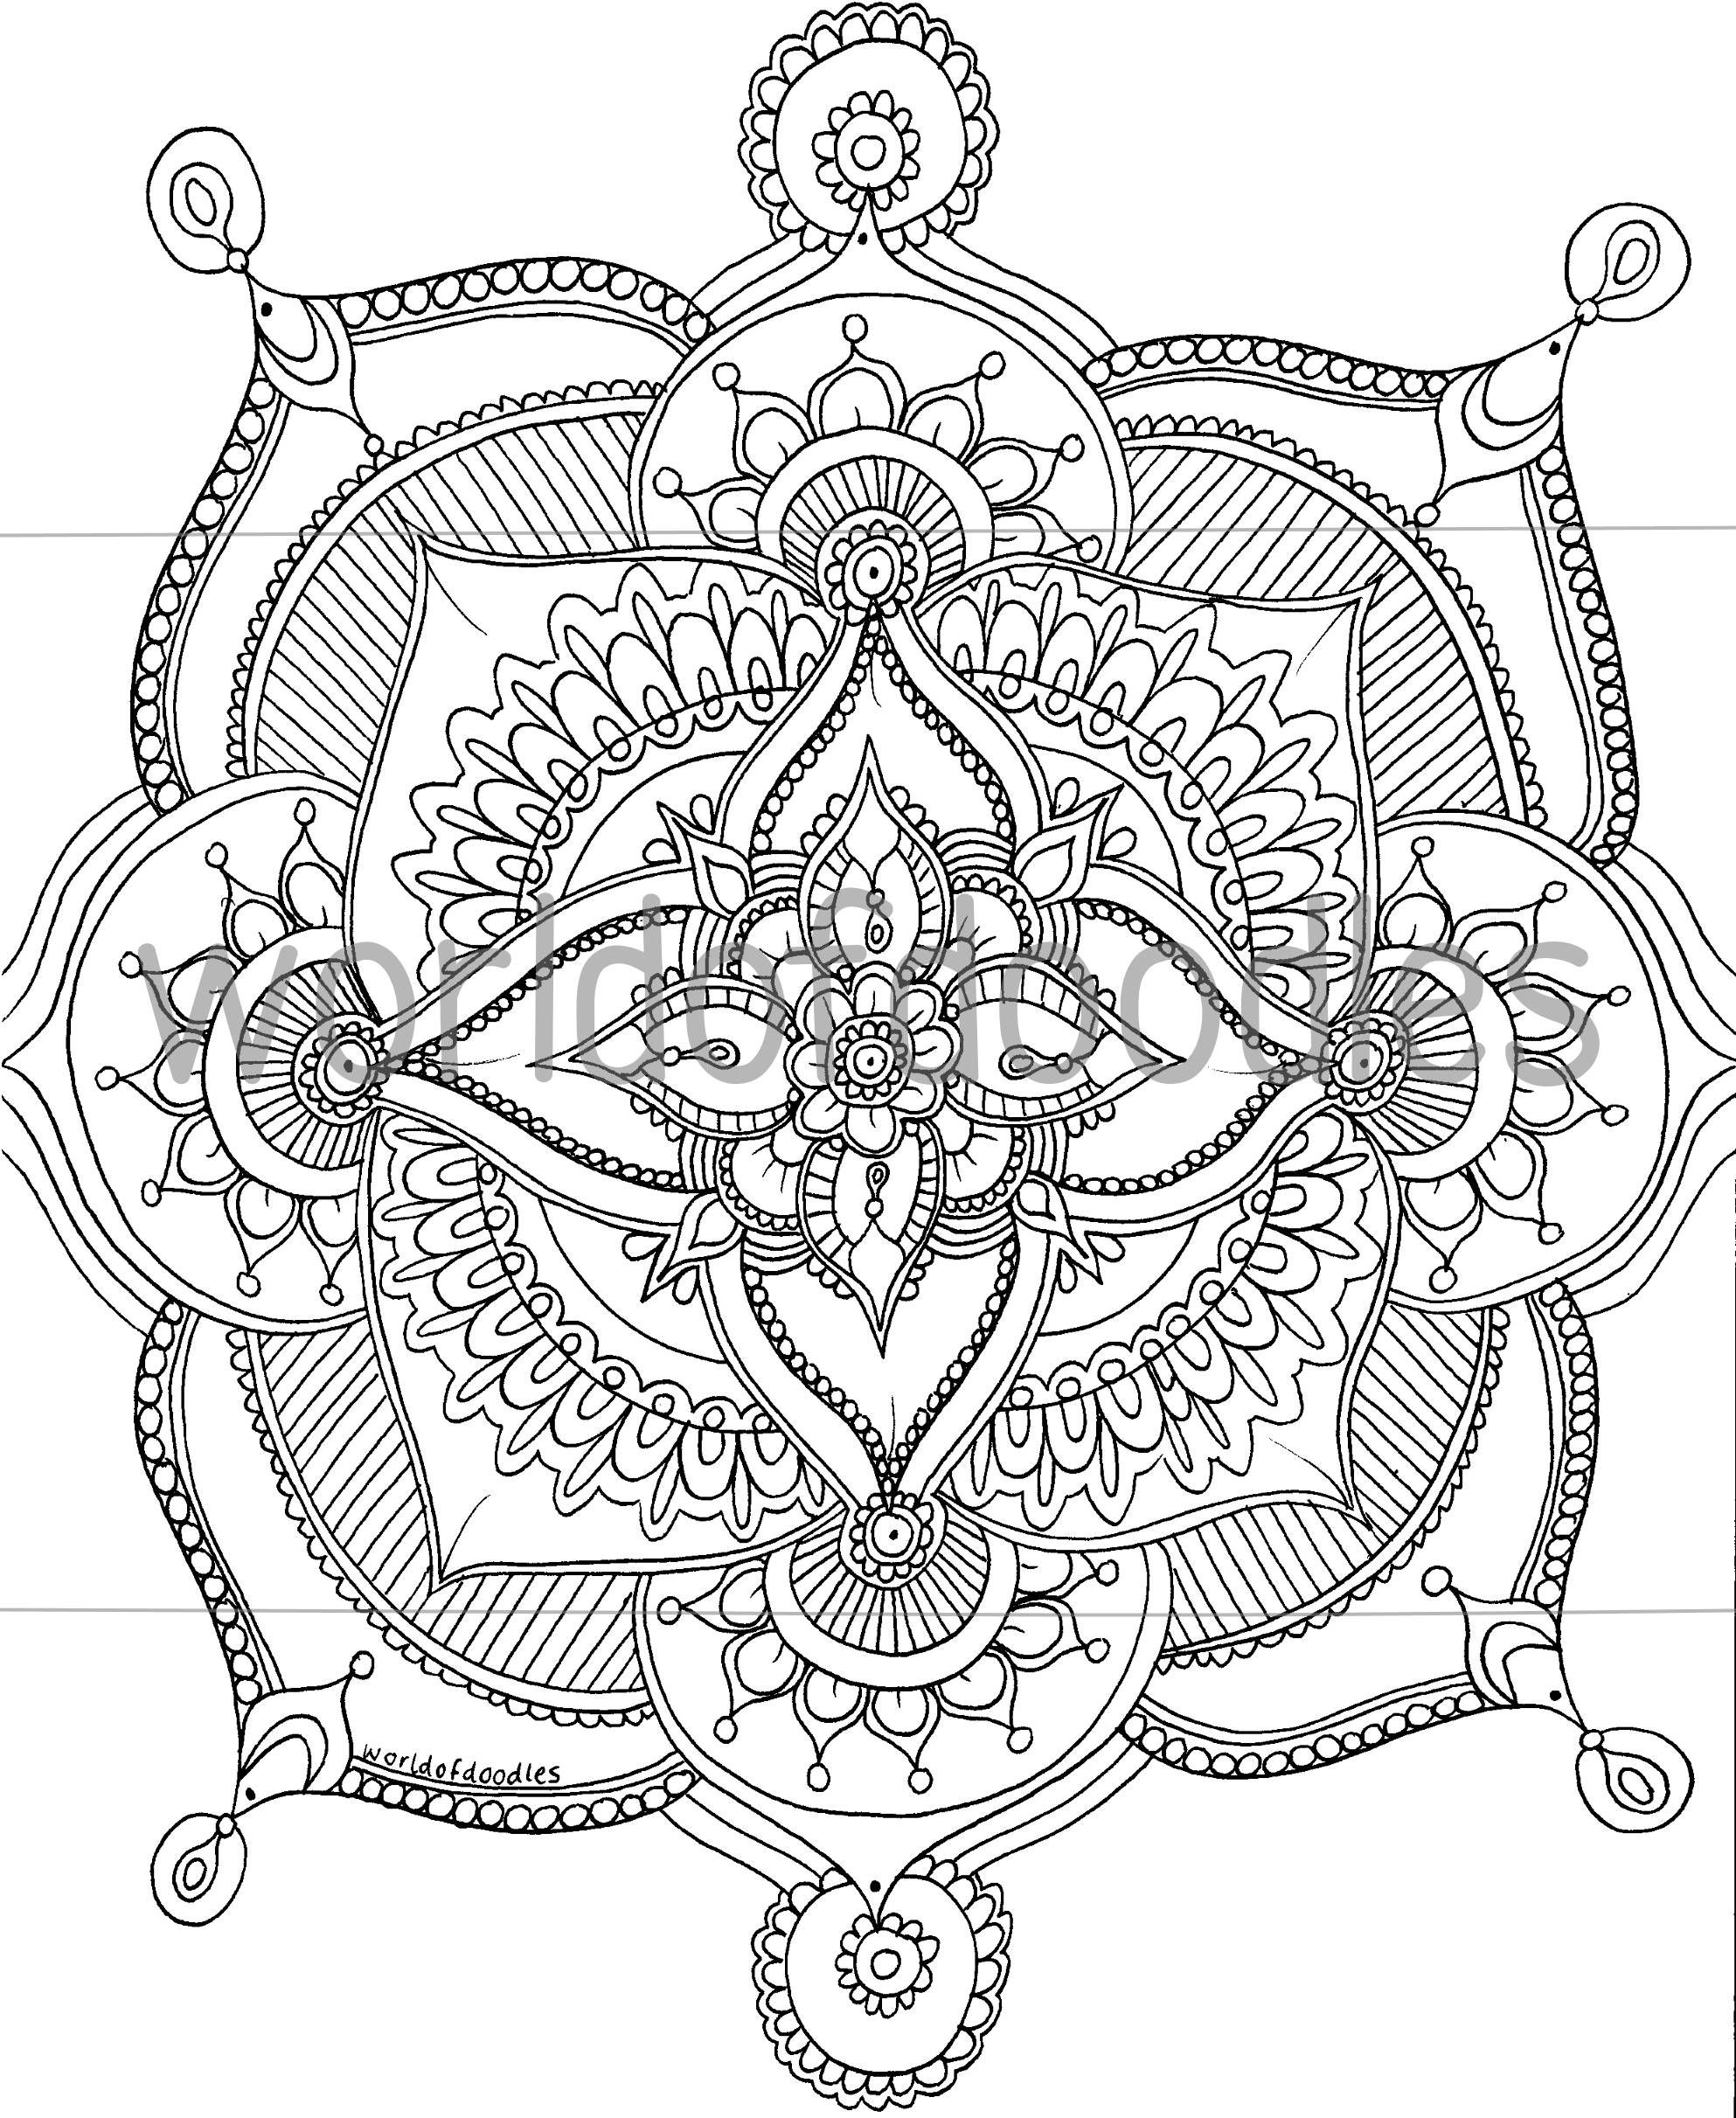 Floral Mandala A4 Downloadable Colouring Page Printable | Etsy